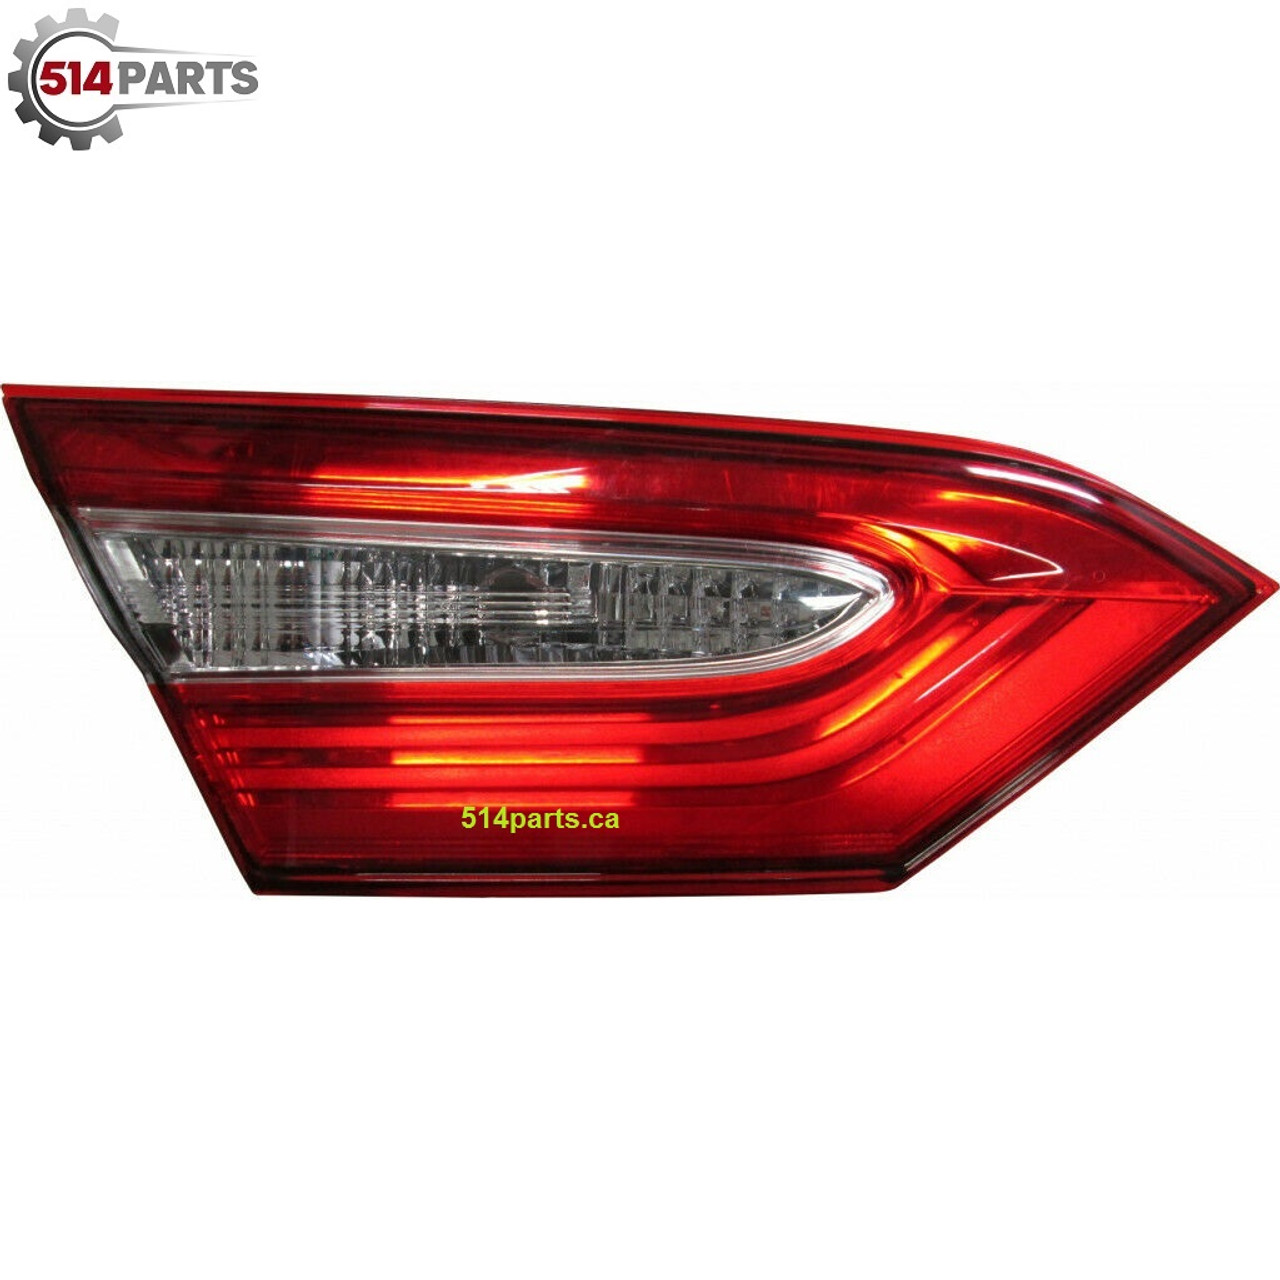 2018 - 2020 TOYOTA CAMRY and CAMRY HYBRID LE JAPAN BUILT Models TRUNK LIGHTS W/O SMOKED TINT High Quality - PHARES ARRIERE DE COFFRE SANS TEINTURE FUMEE Haute Qualite